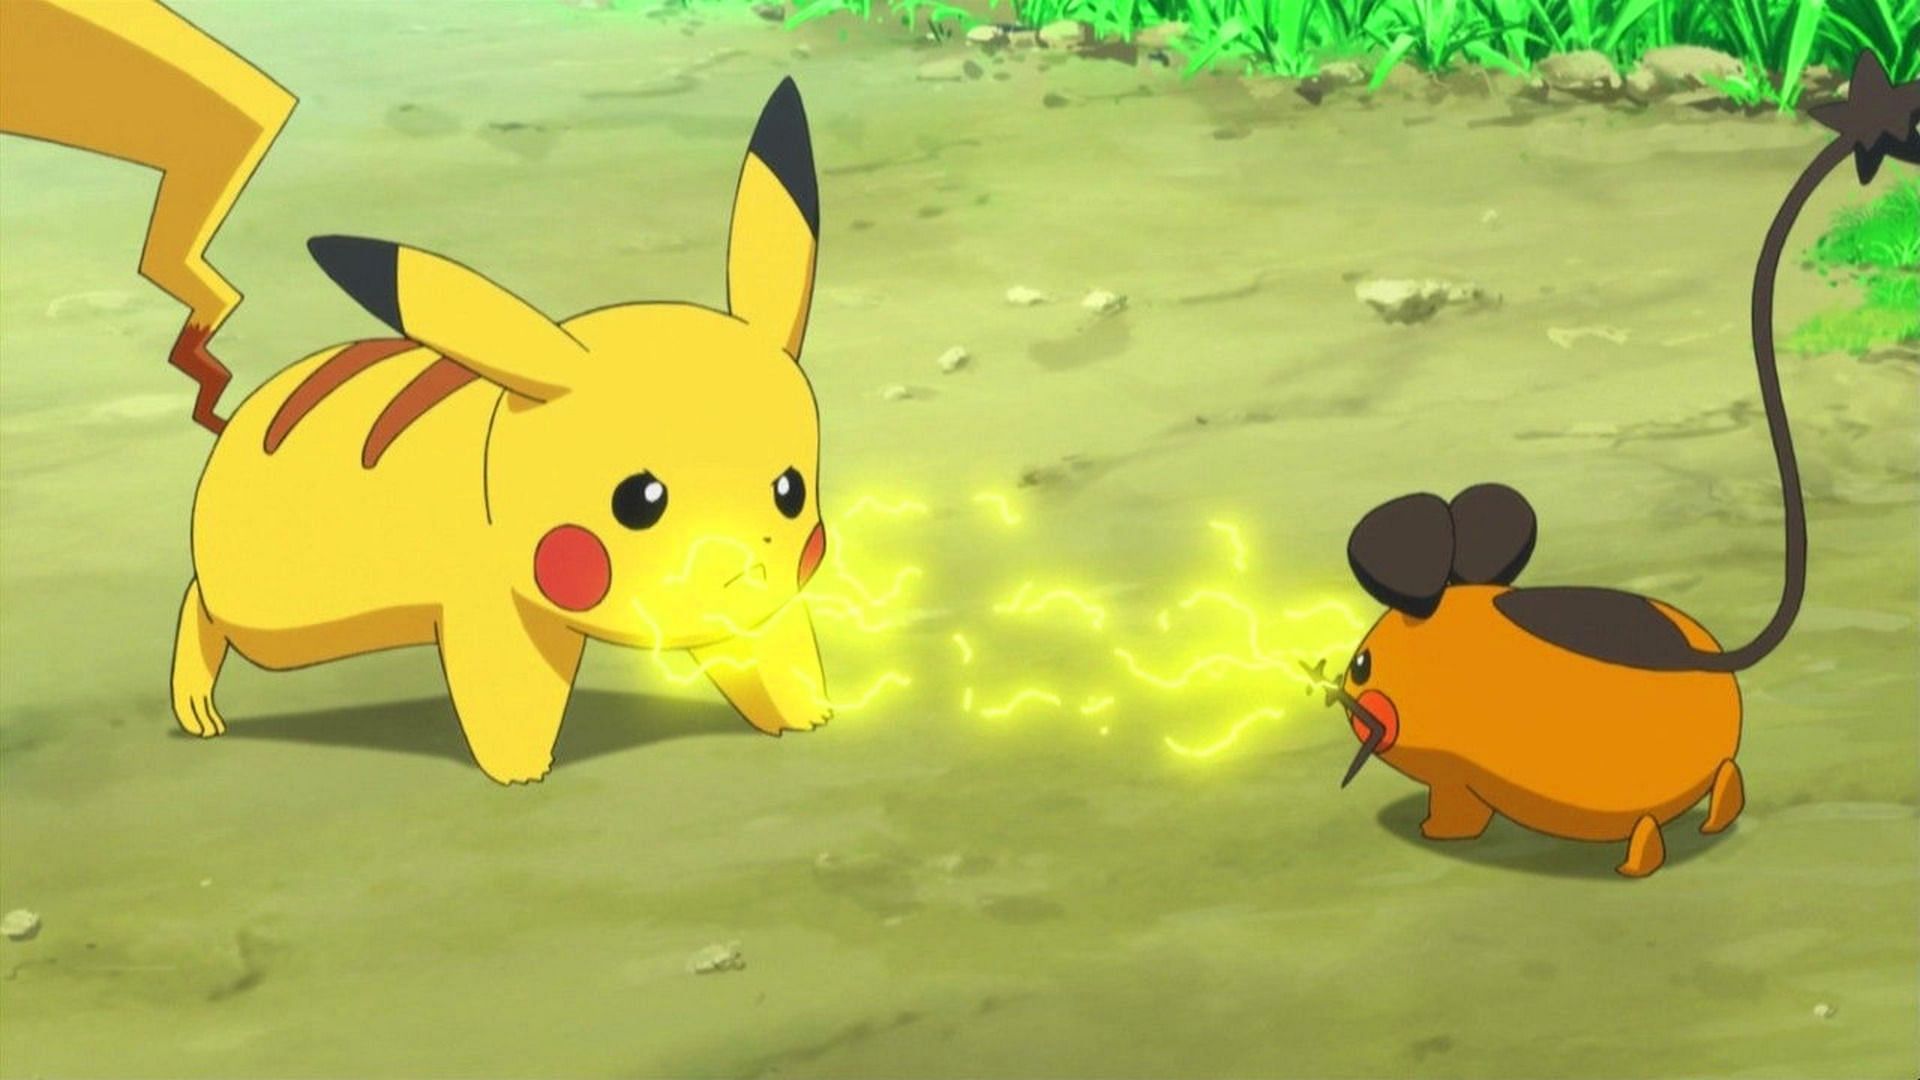 Pikachu and Dedenne as seen in the anime